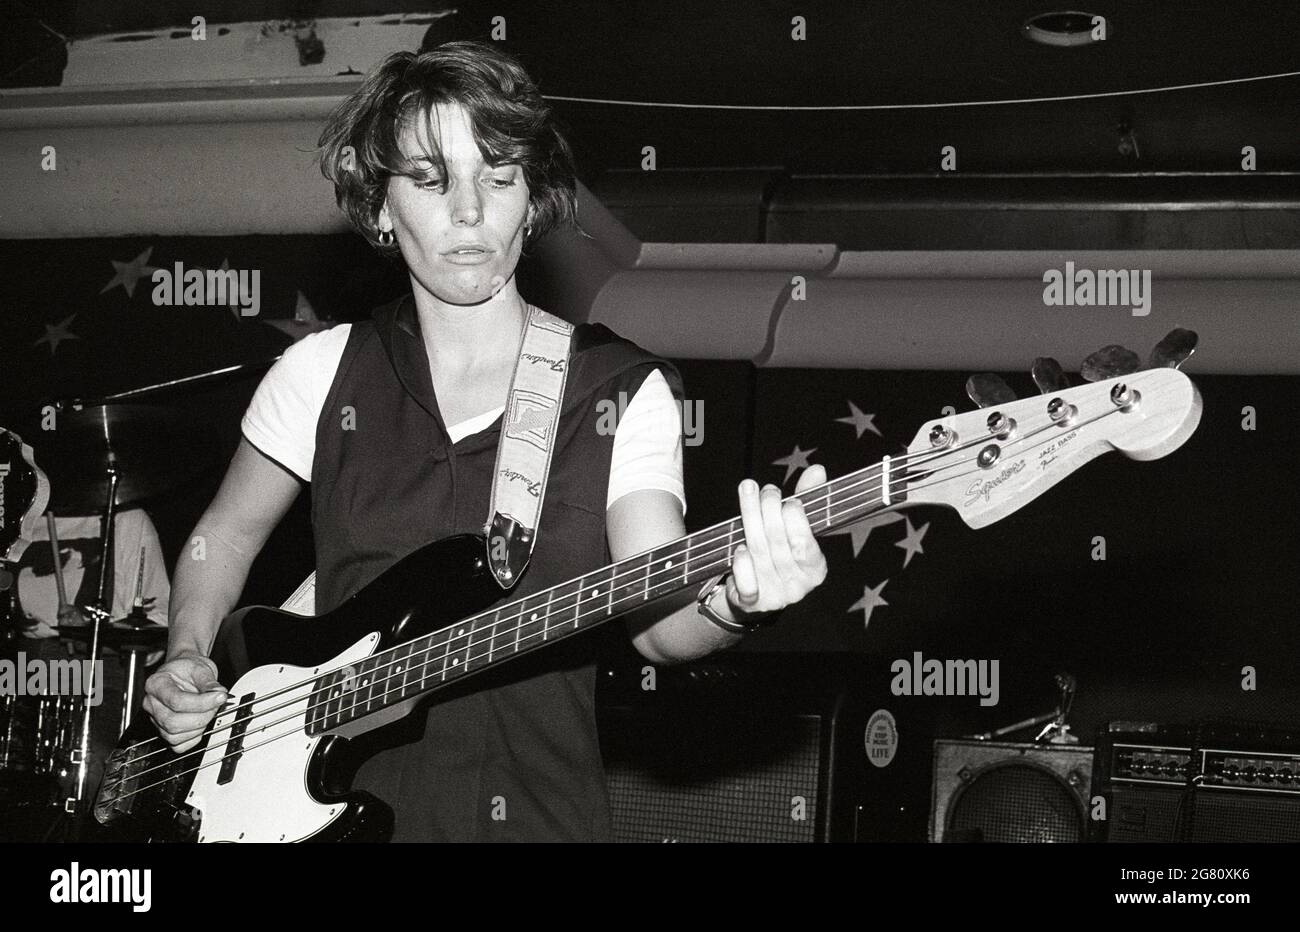 Bass guitarist Katrina Slack of the Renees playing at an unknown London venue in 1990. She now lives in Cornwall where she works as a 3D artist. Stock Photo